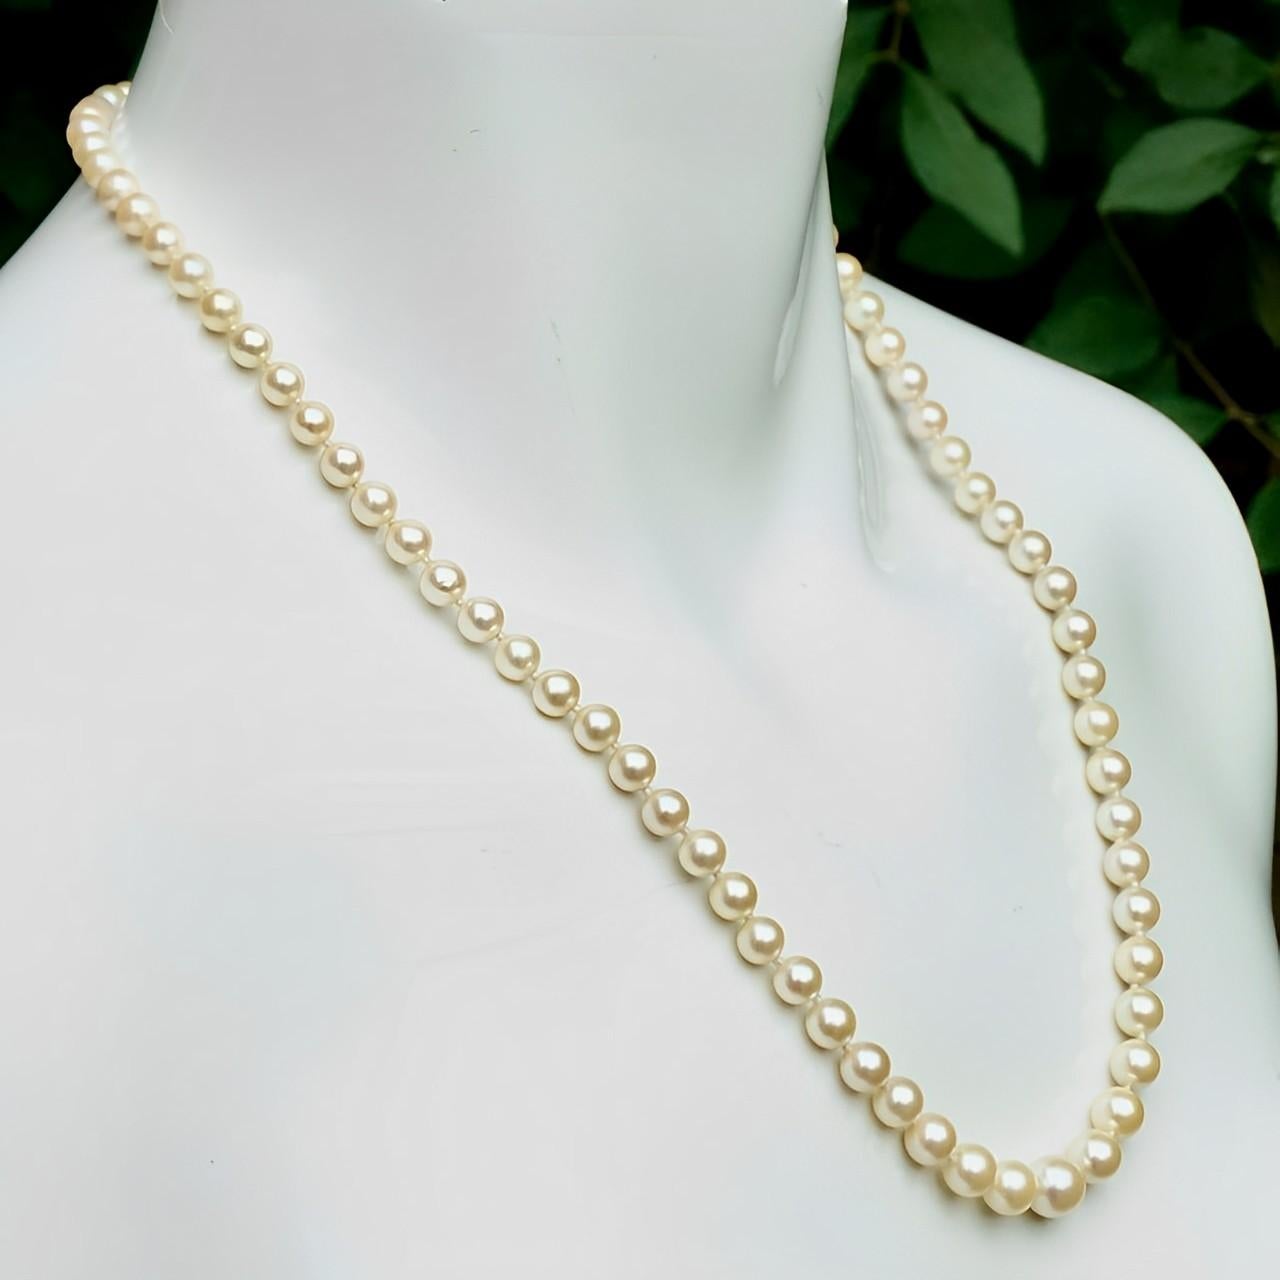 Graduated Cream Cultured Pearl Necklace with 9K Gold and Cultured Pearl Clasp For Sale 3